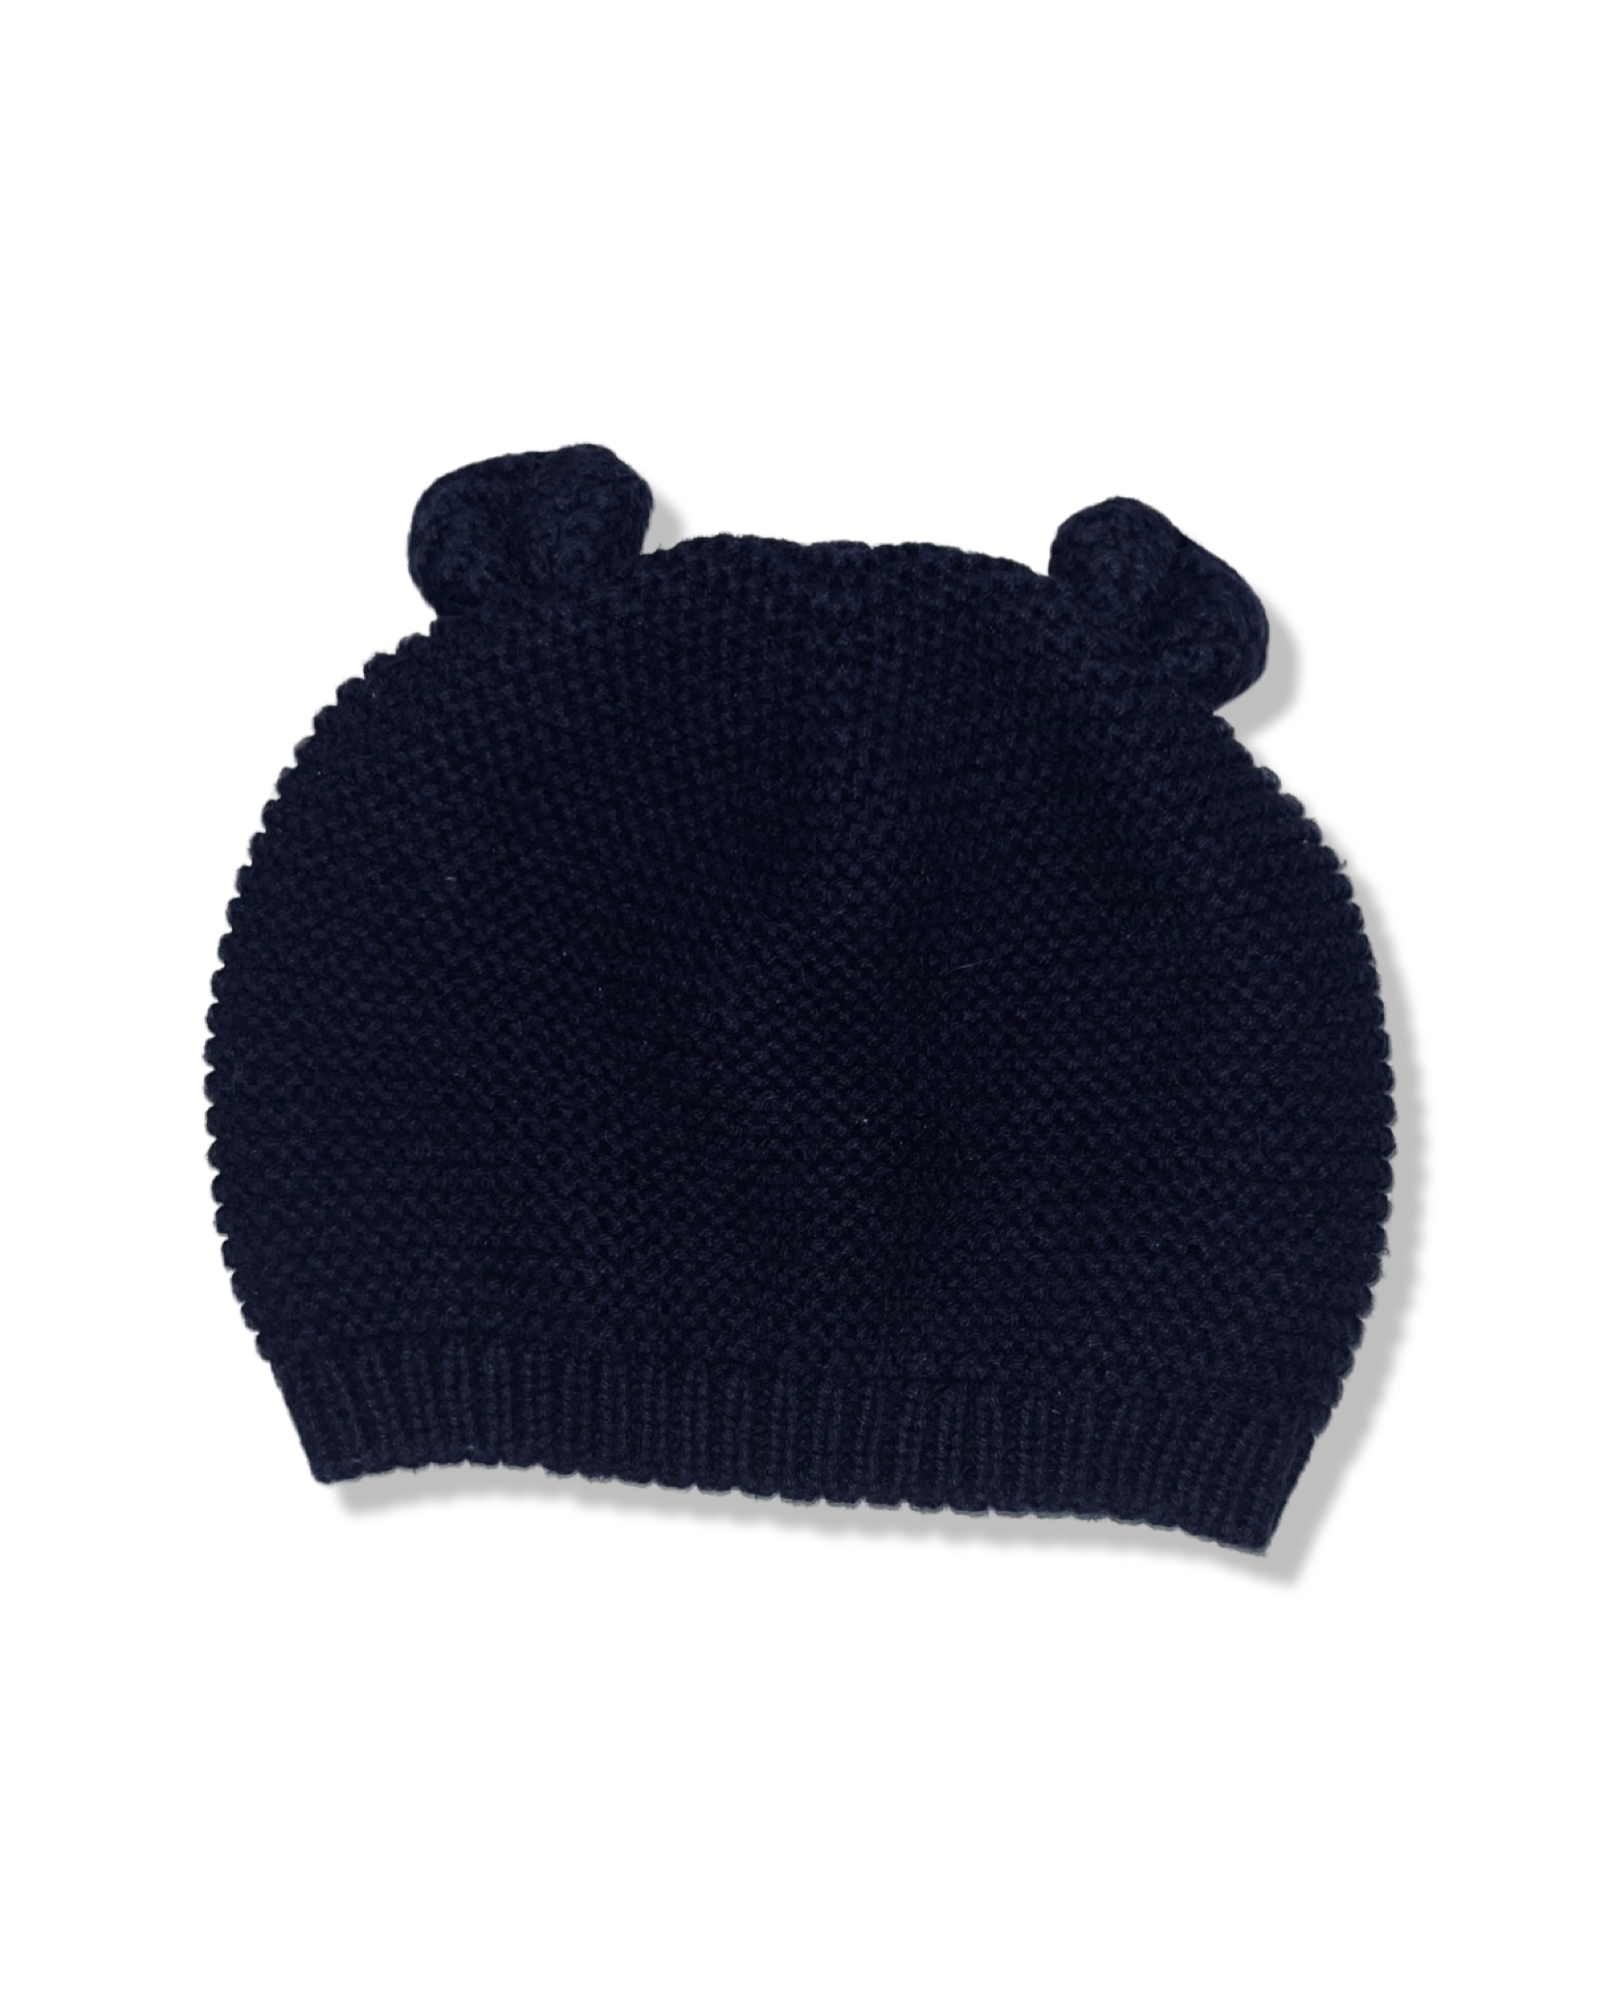 Baby Gap Blue Knit Hat with Ears (0-3M)